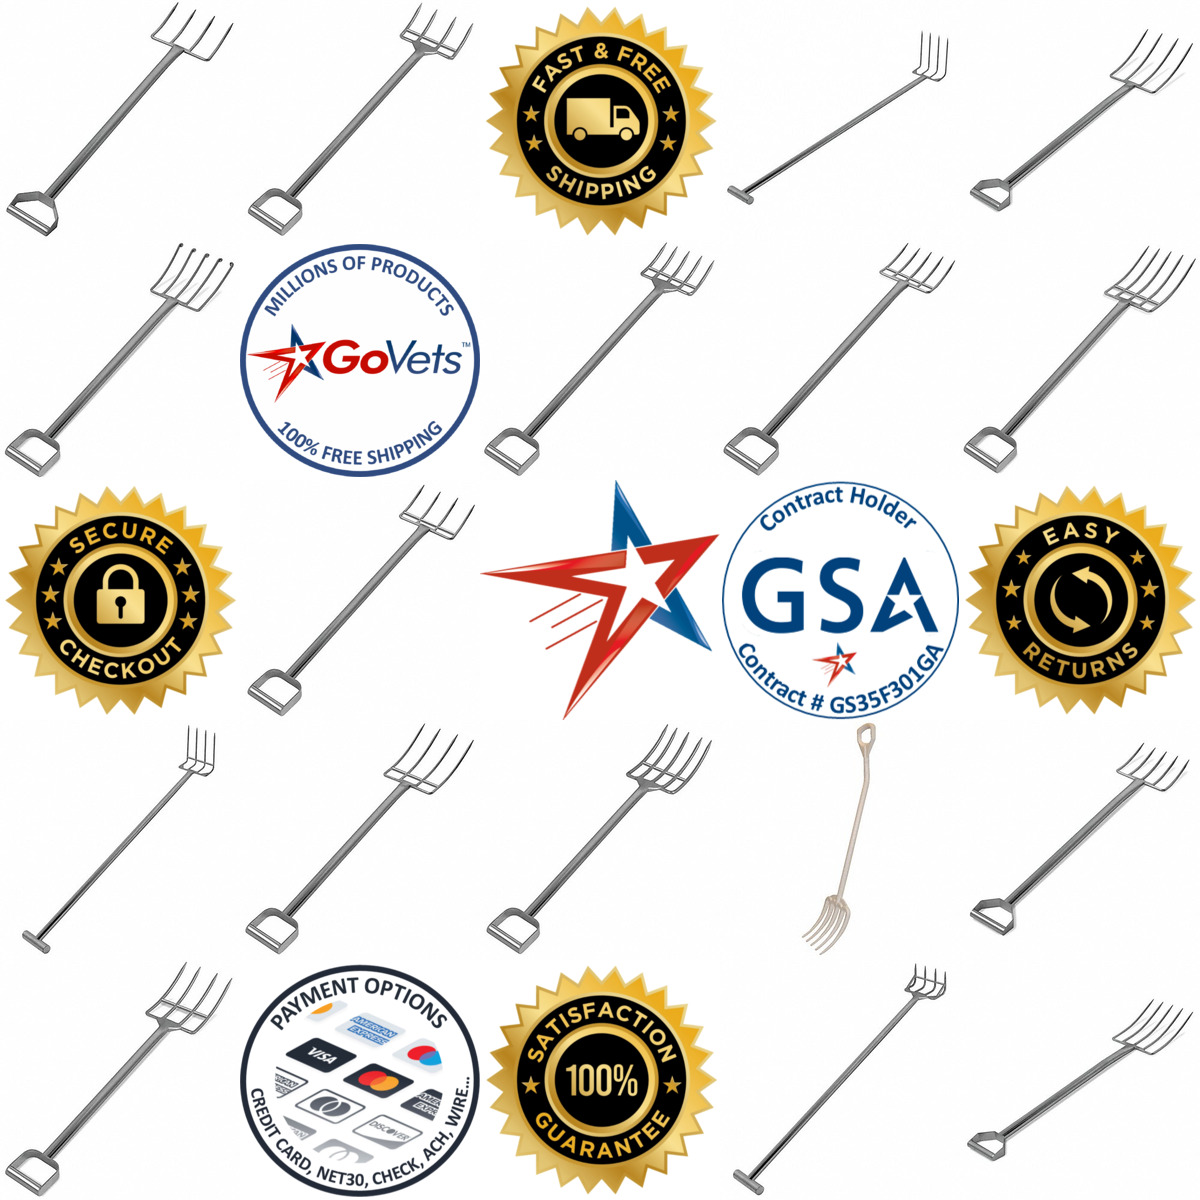 A selection of Forks products on GoVets